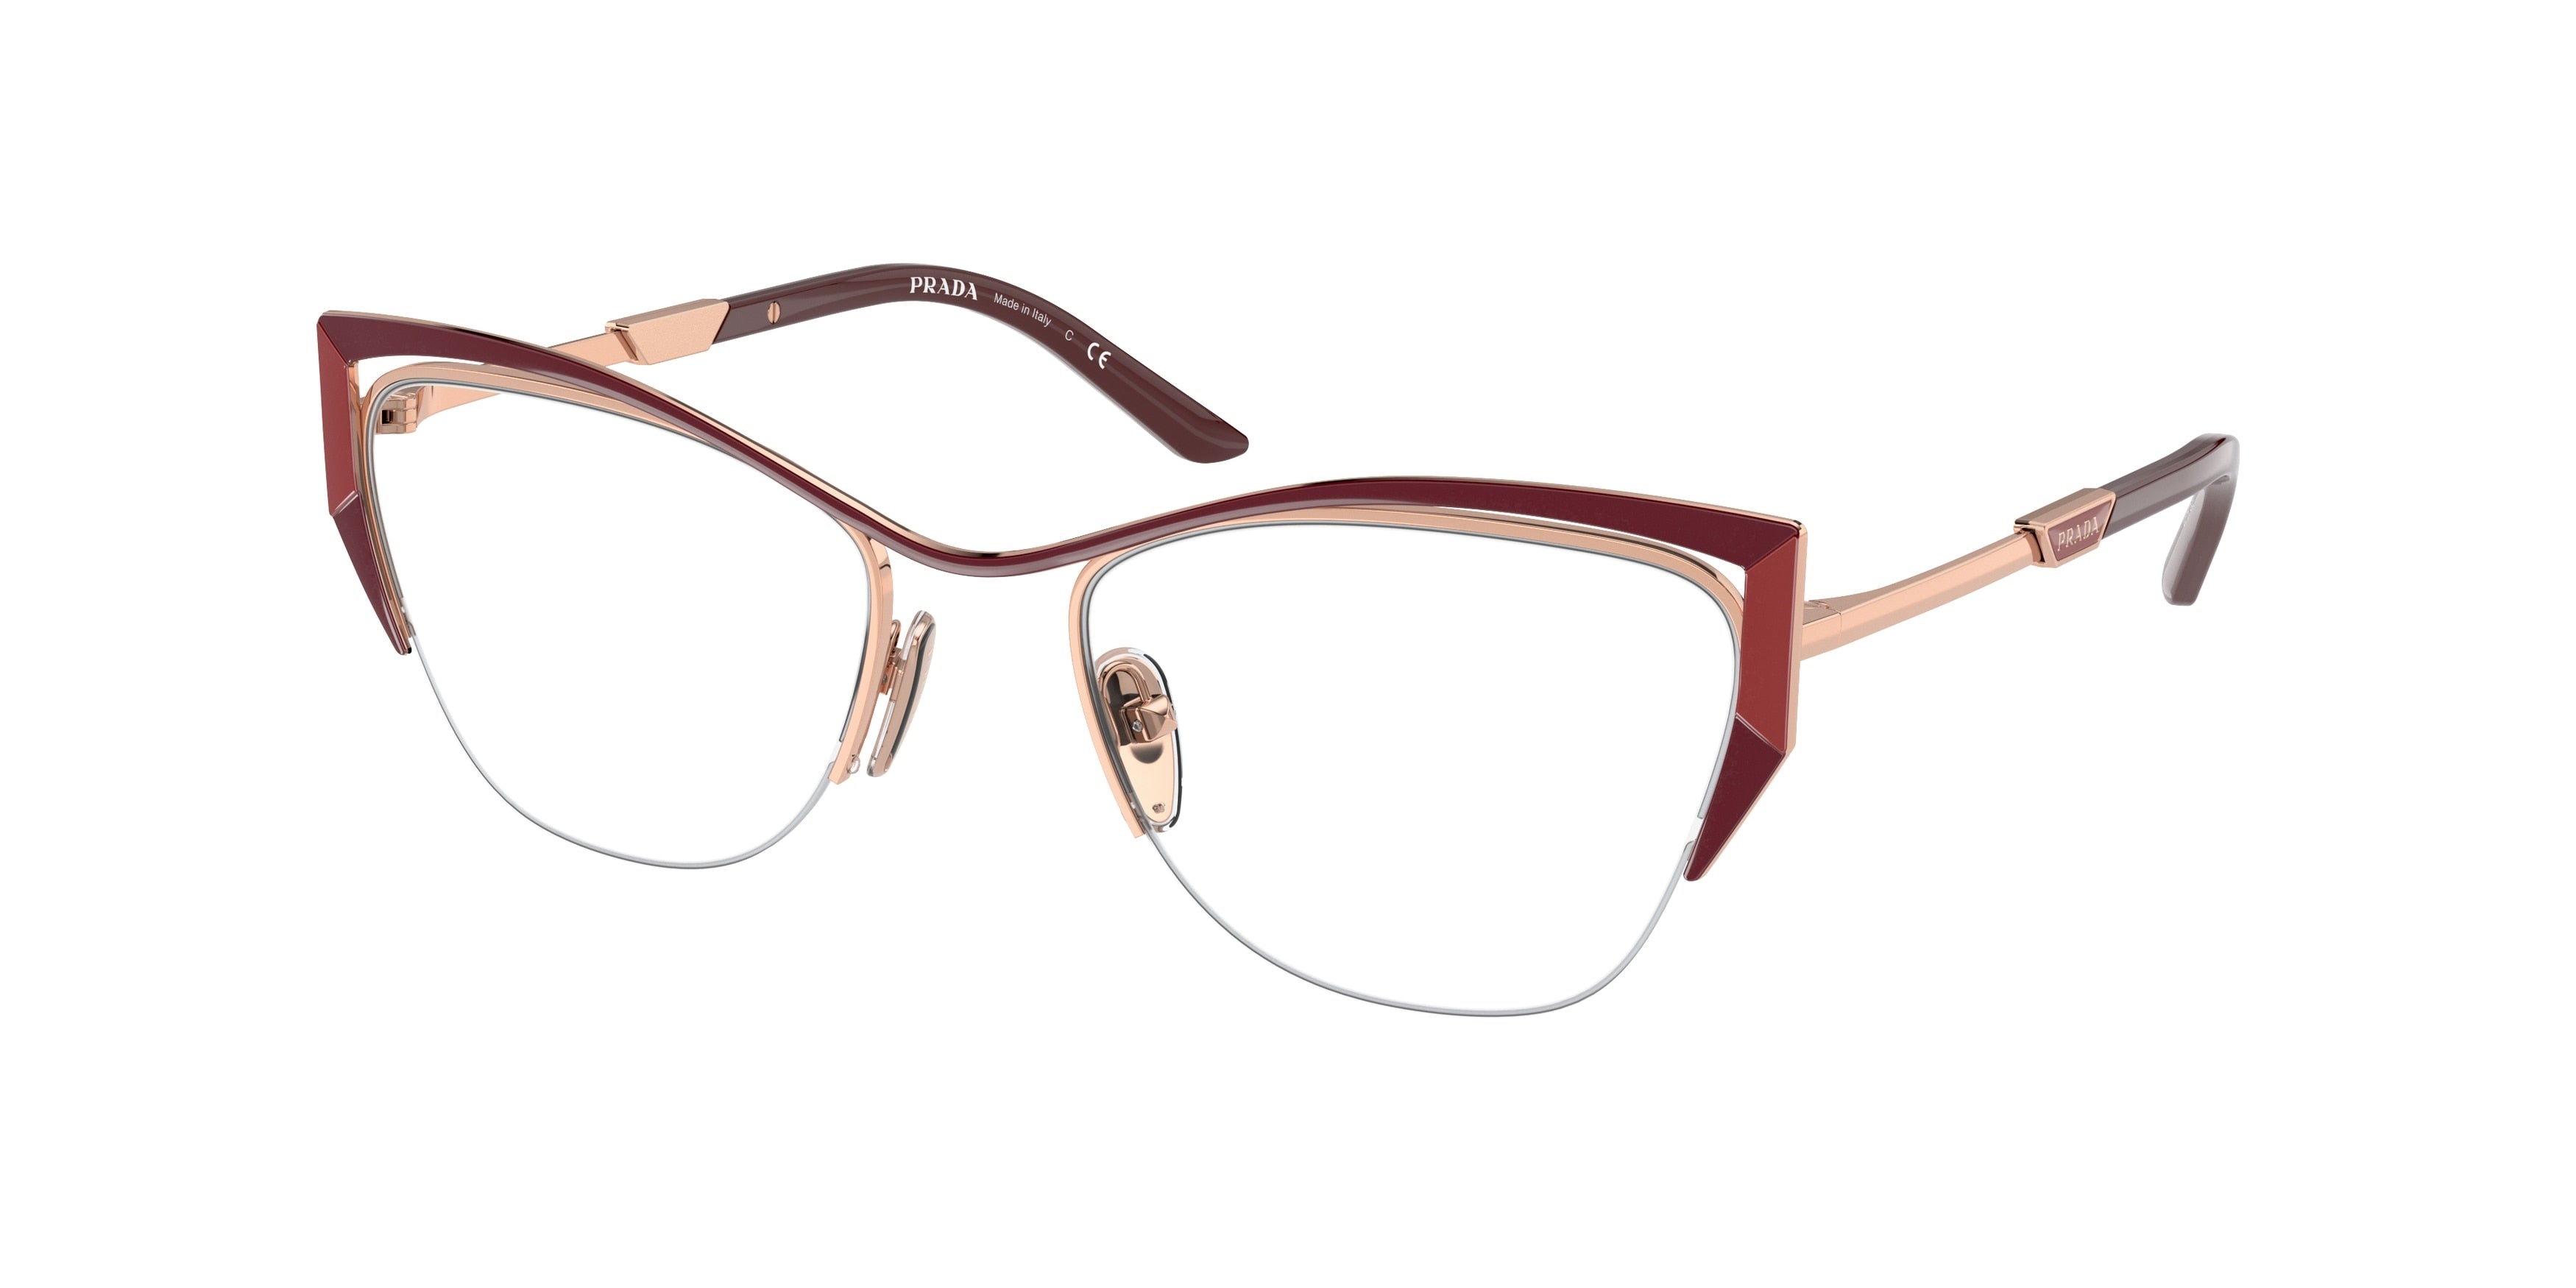 Prada PR63YV Butterfly Eyeglasses  13A1O1-Red/Fire/Rose Gold 54-135-19 - Color Map Red